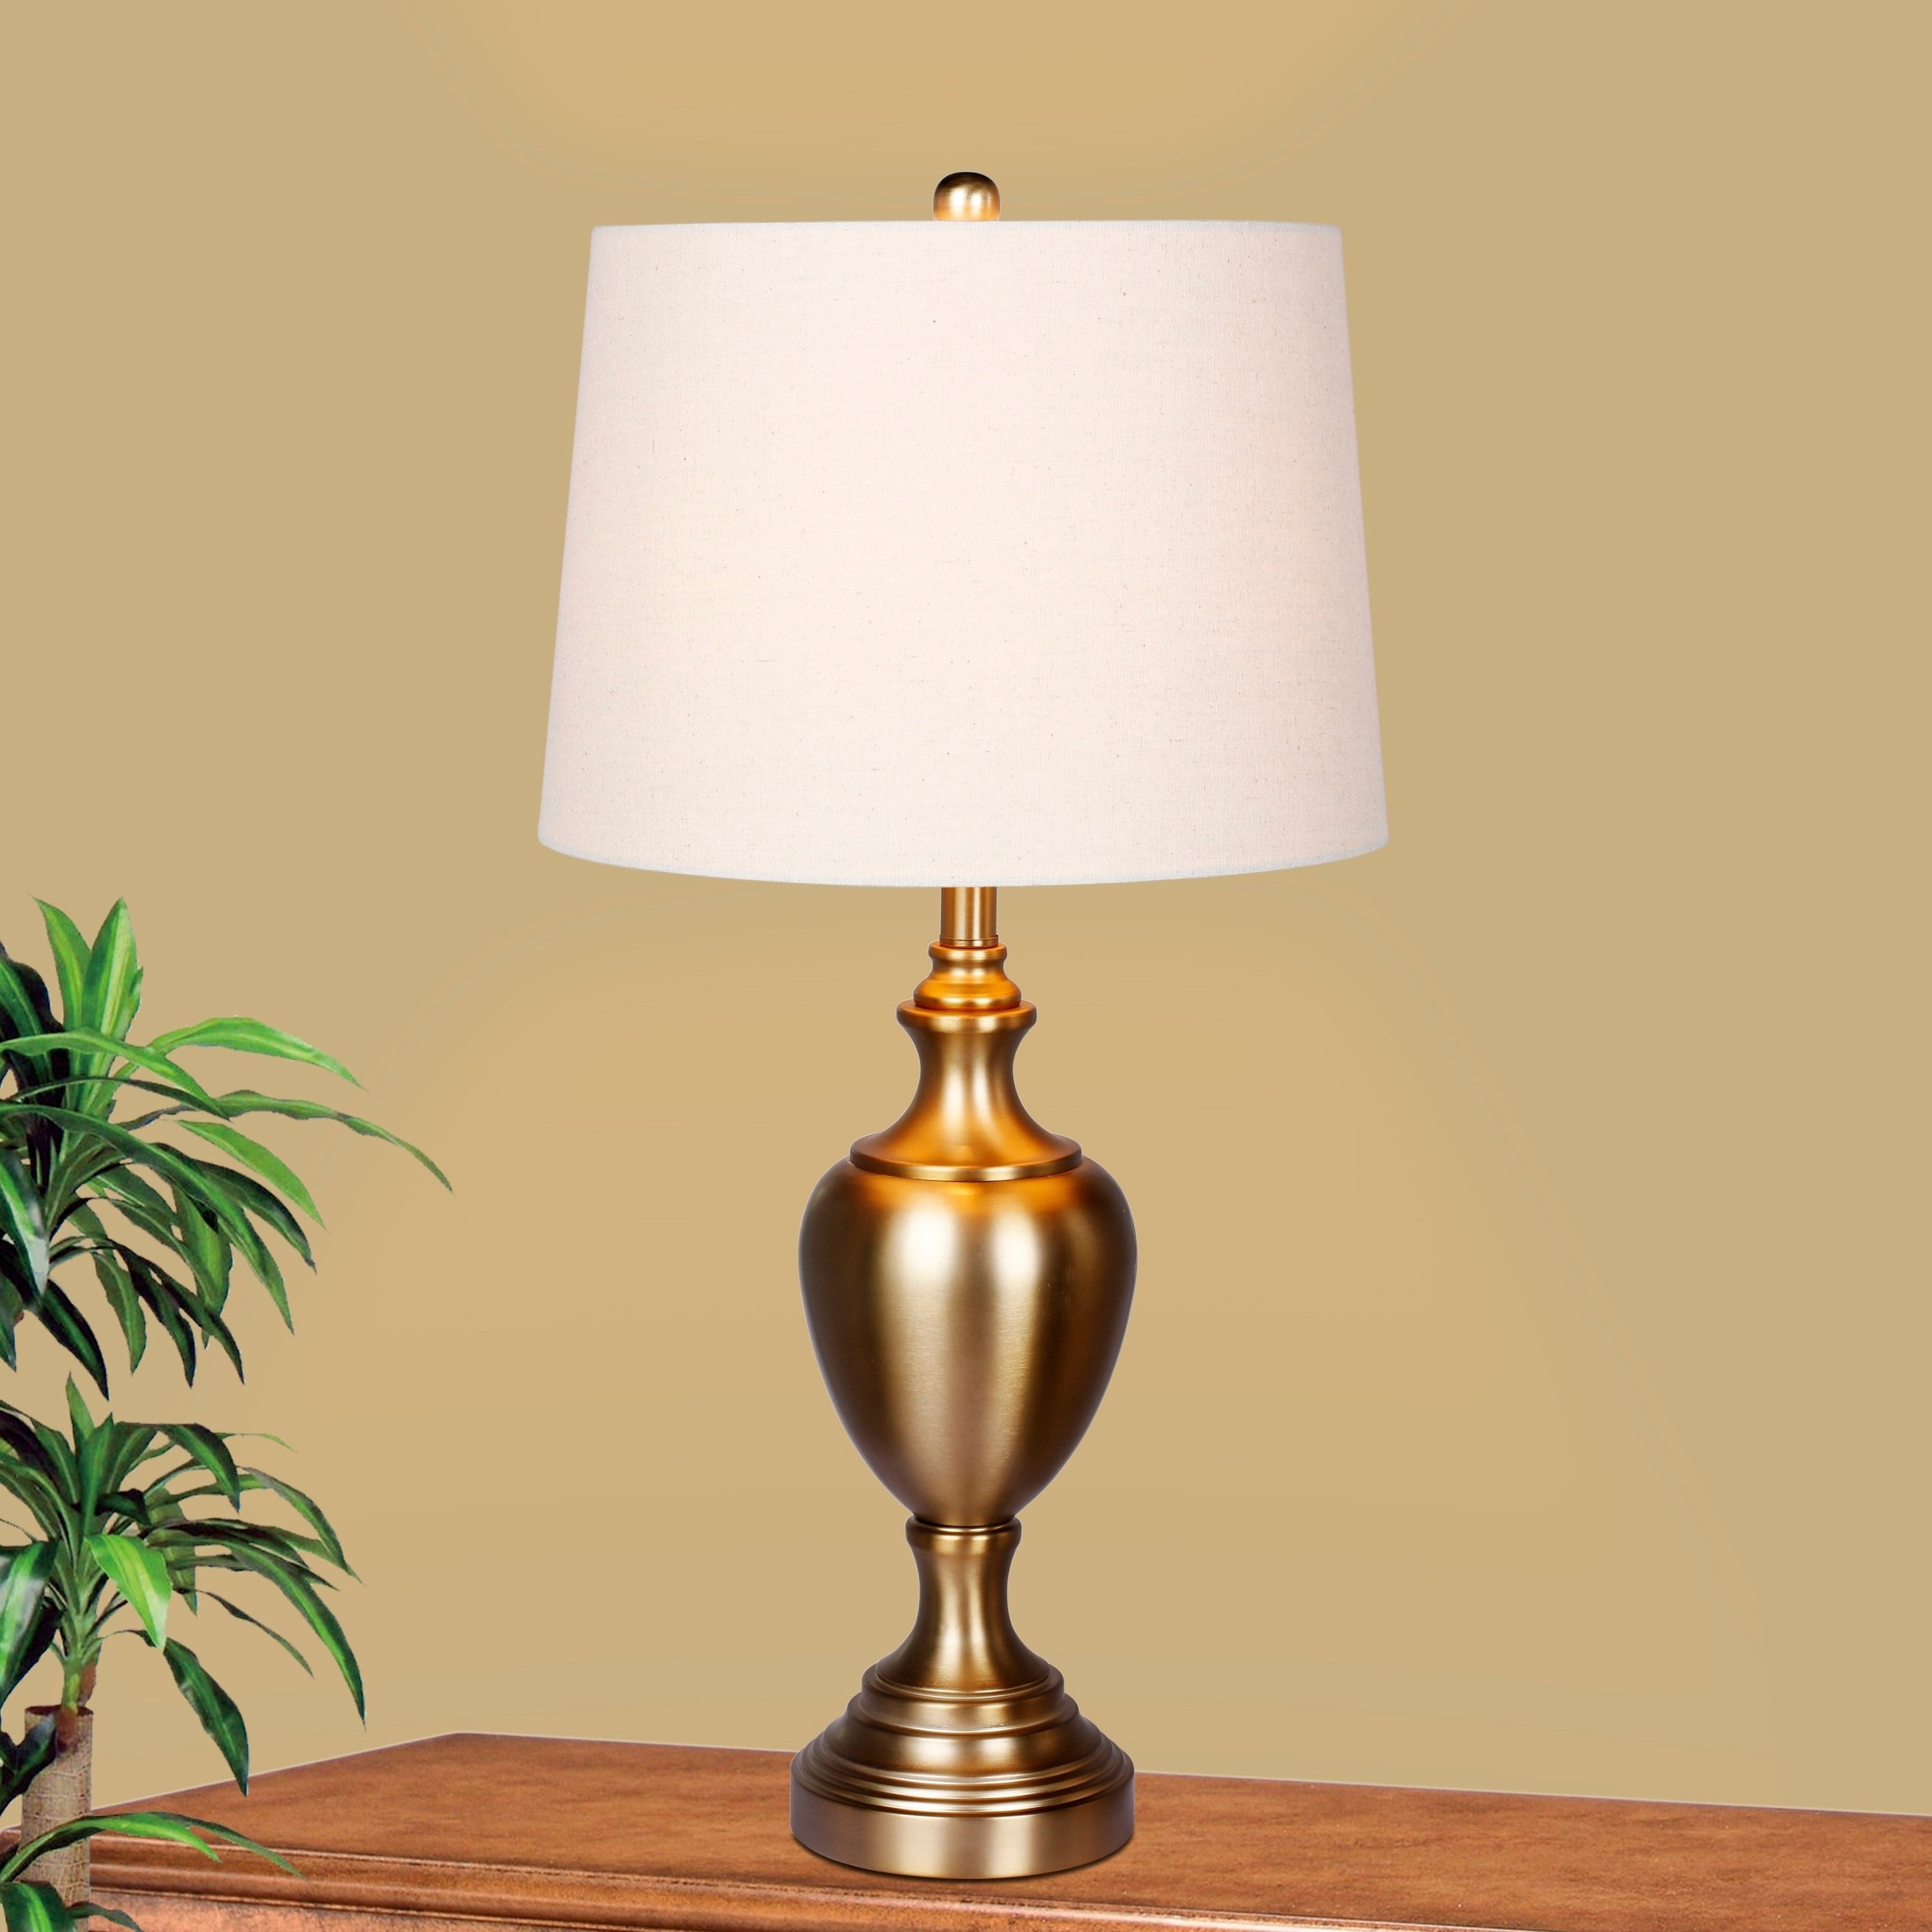 Cory Martin W-1566AG-2PK Urn with Pedestal Base Metal Table Lamps 30 Plated Antique Gold 2 Set Fangio Lighting 